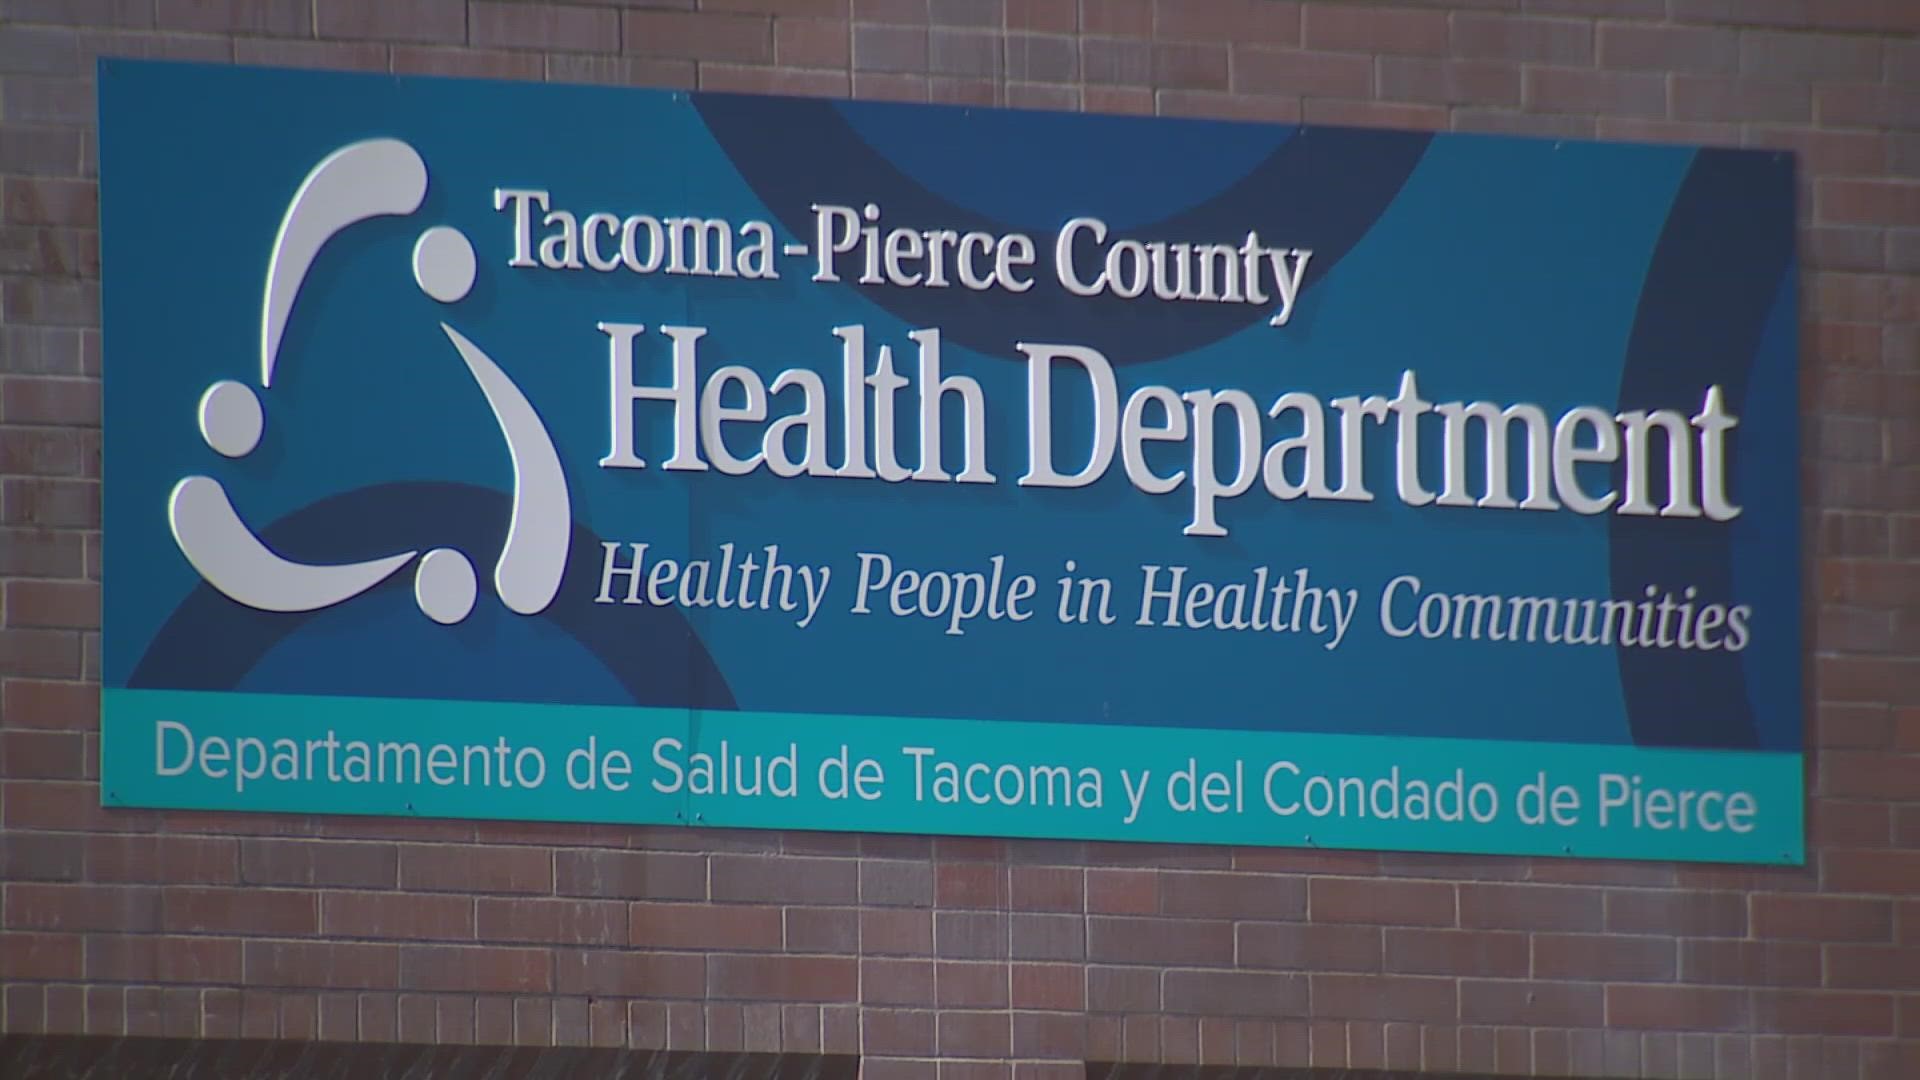 As a last resort in the interest of public health, an arrest warrant has been issued for a Tacoma woman who has refused tuberculosis treatment for over a year.